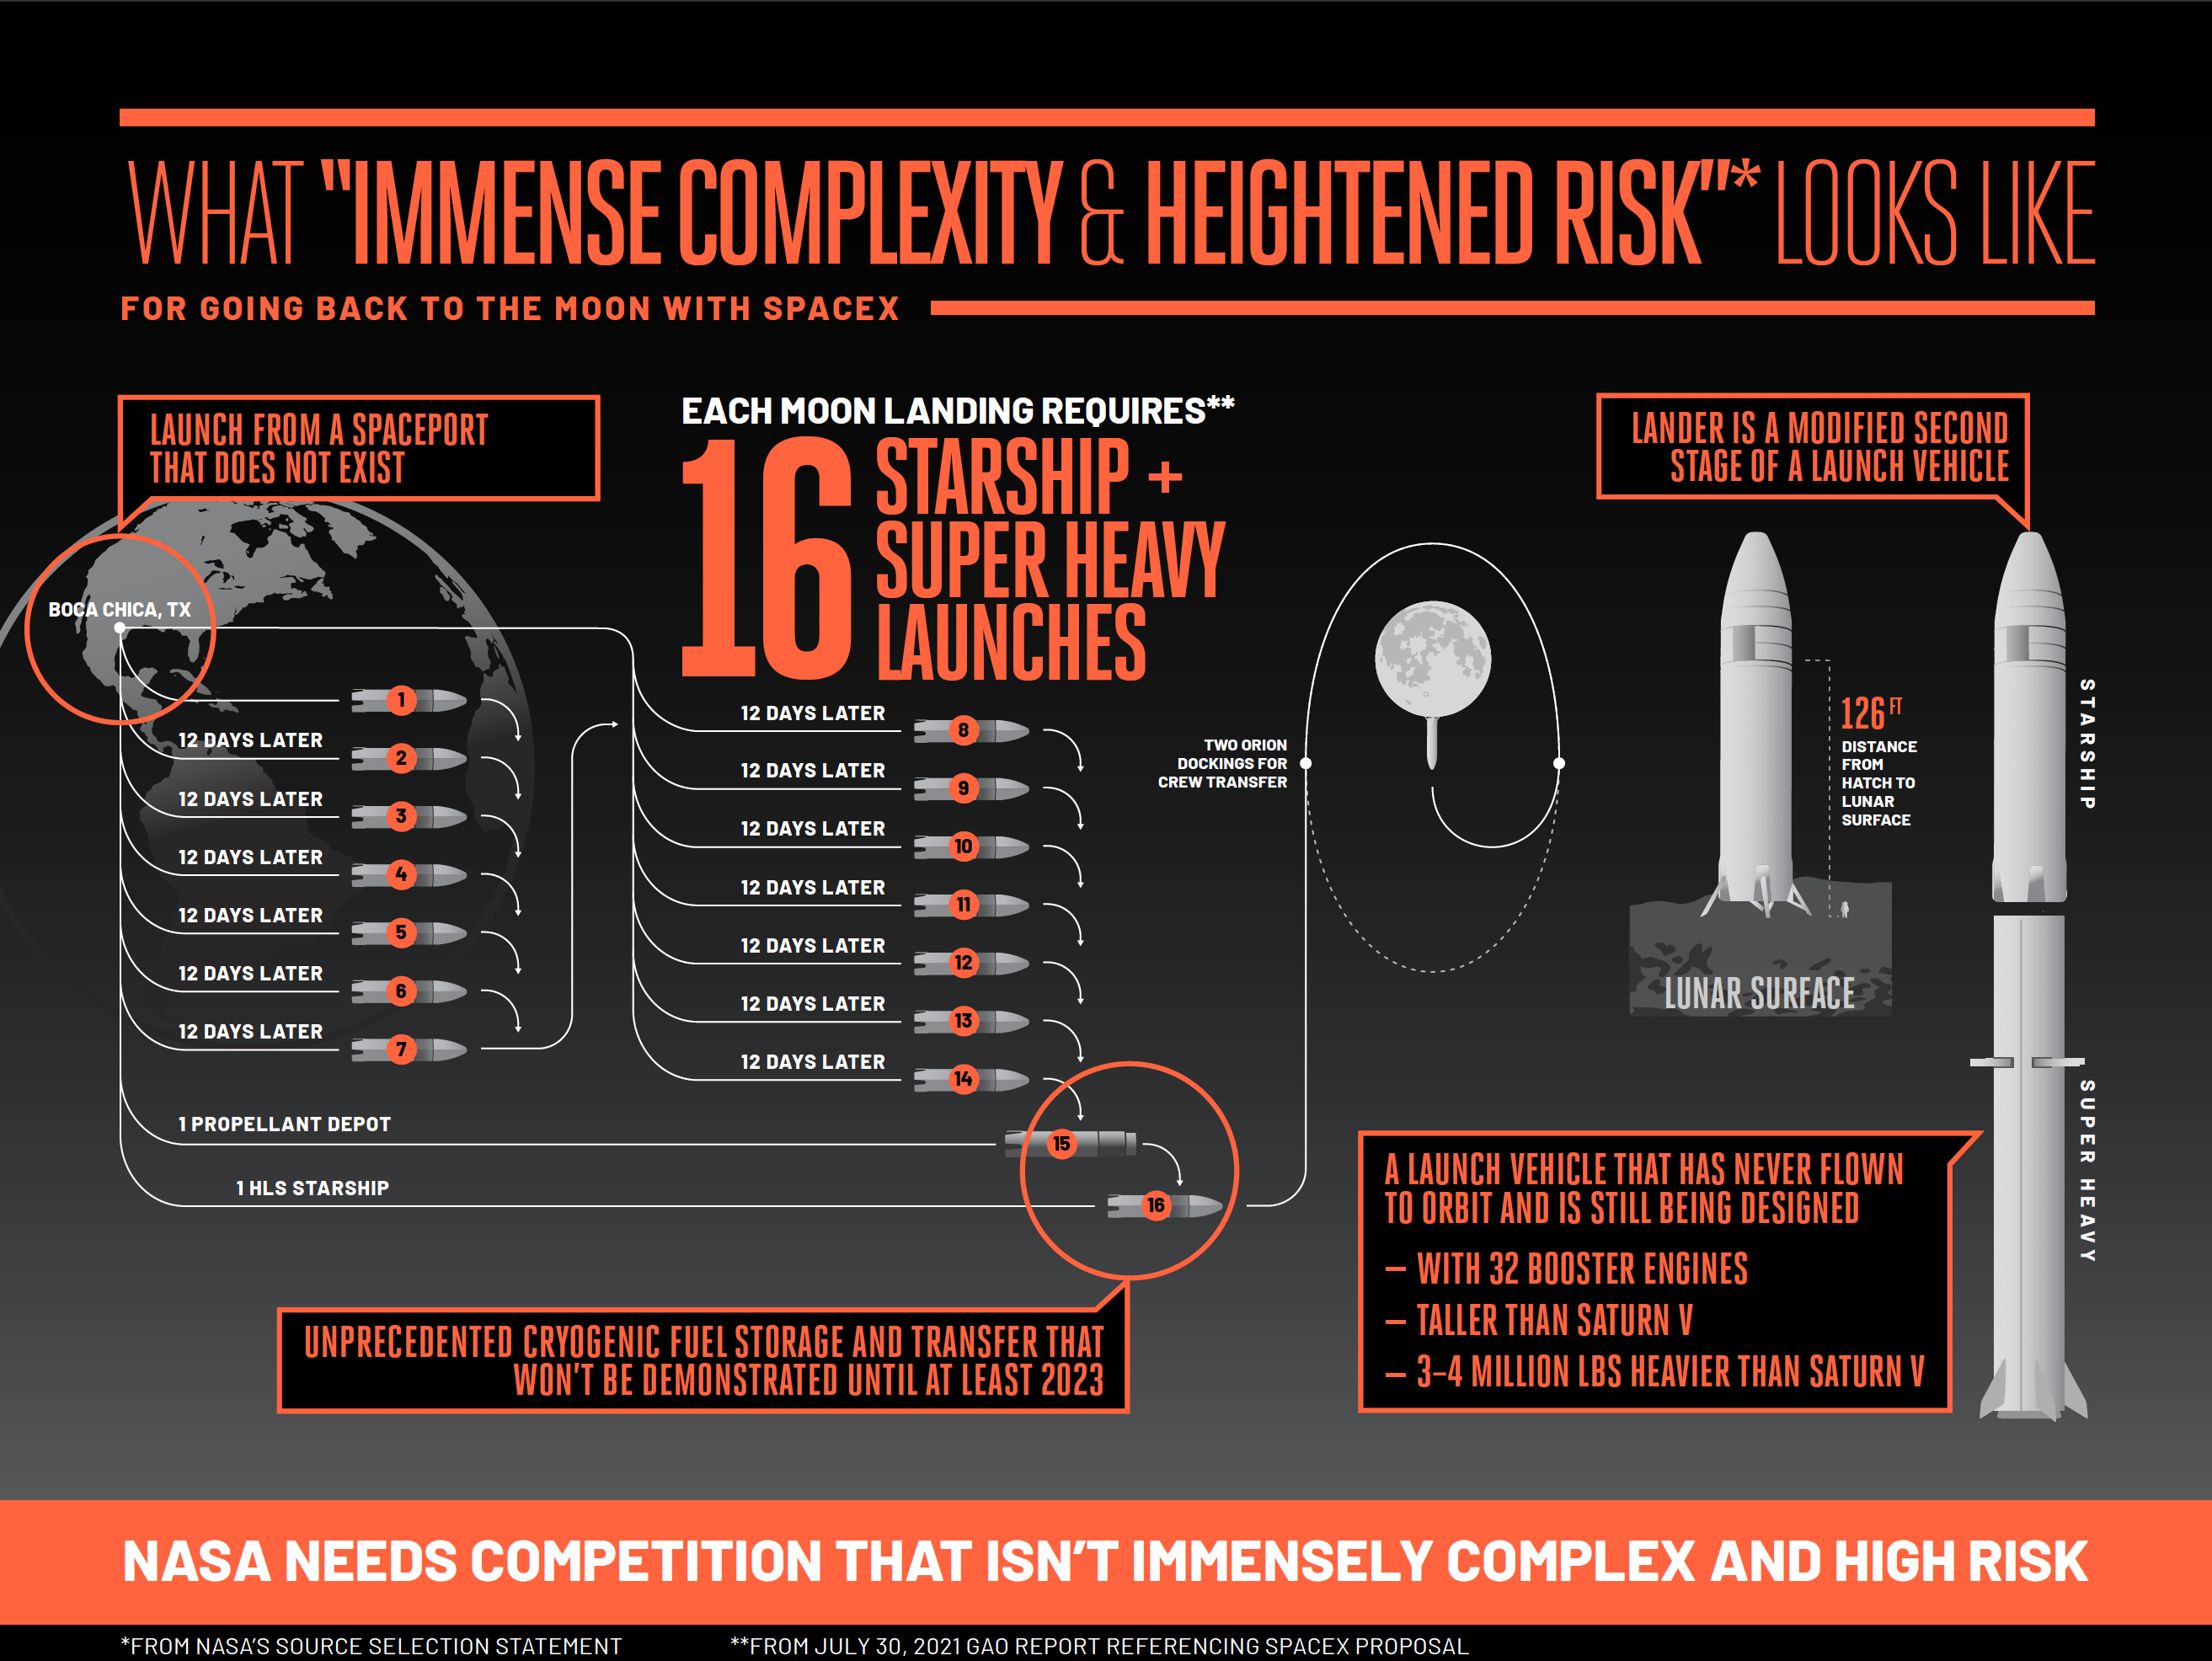 Blue Origin infographic demeaning the SpaceX solution to a lunar lander. SpaceX CEO Elon Musk took issue with this infographic, saying eight and possibly as few as four launches would be required, not the 16 claimed here. (Image: Blue Origin)